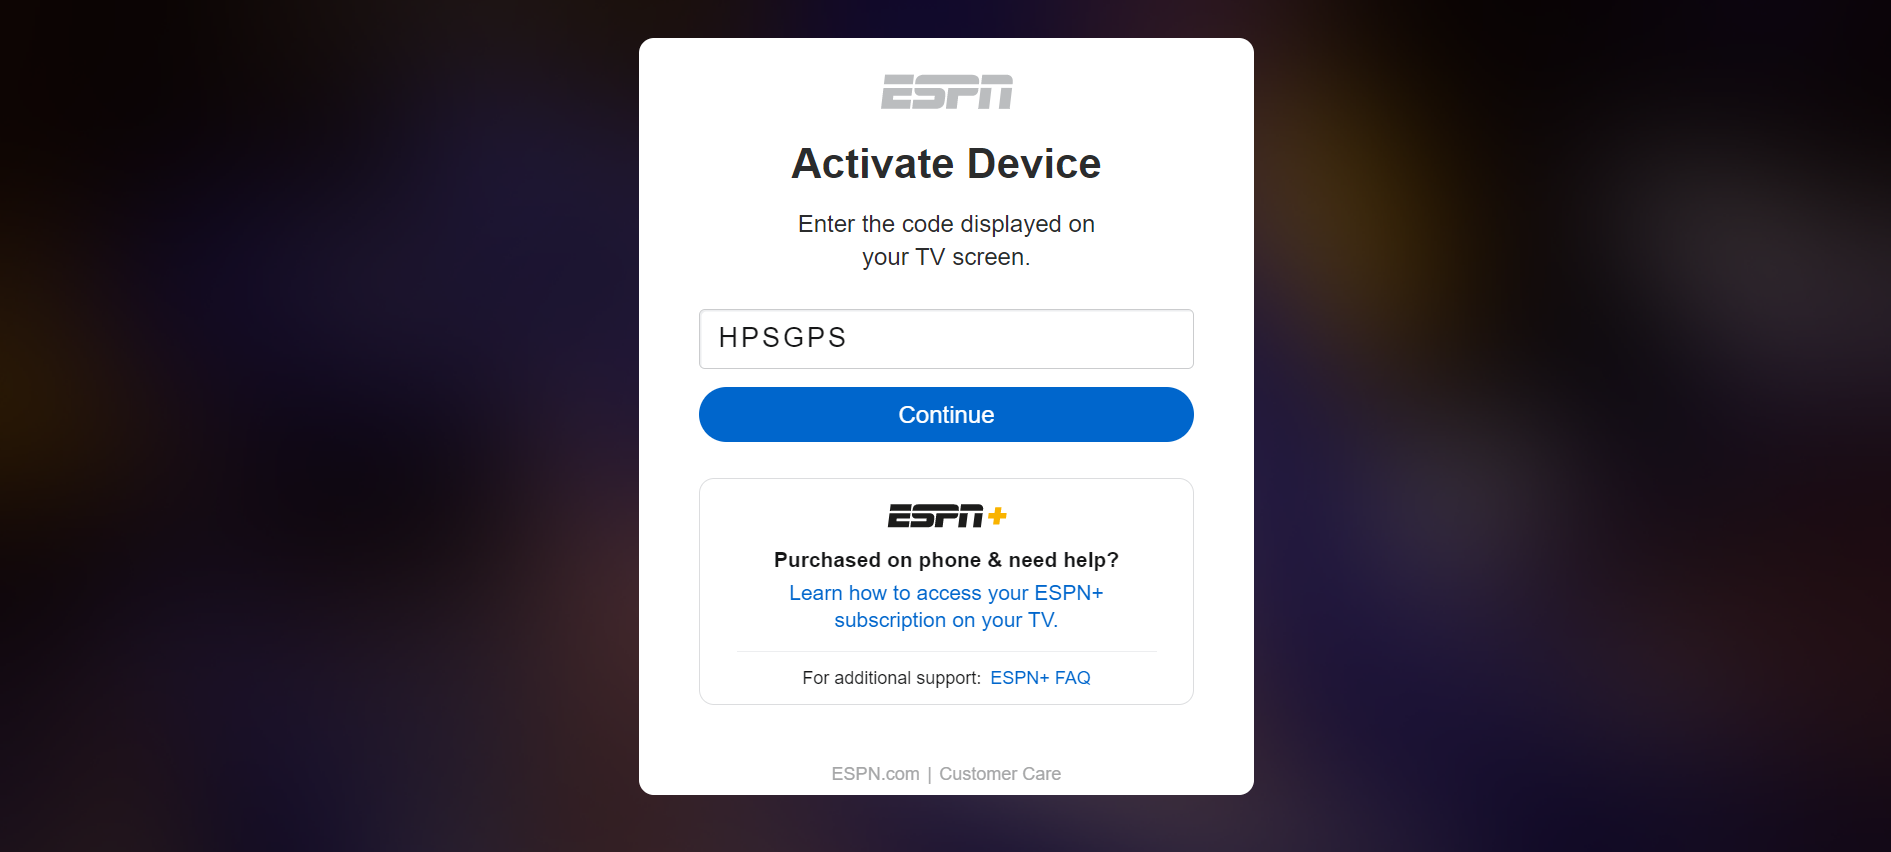 Open any web browser on another device and go to espn.com/activate.